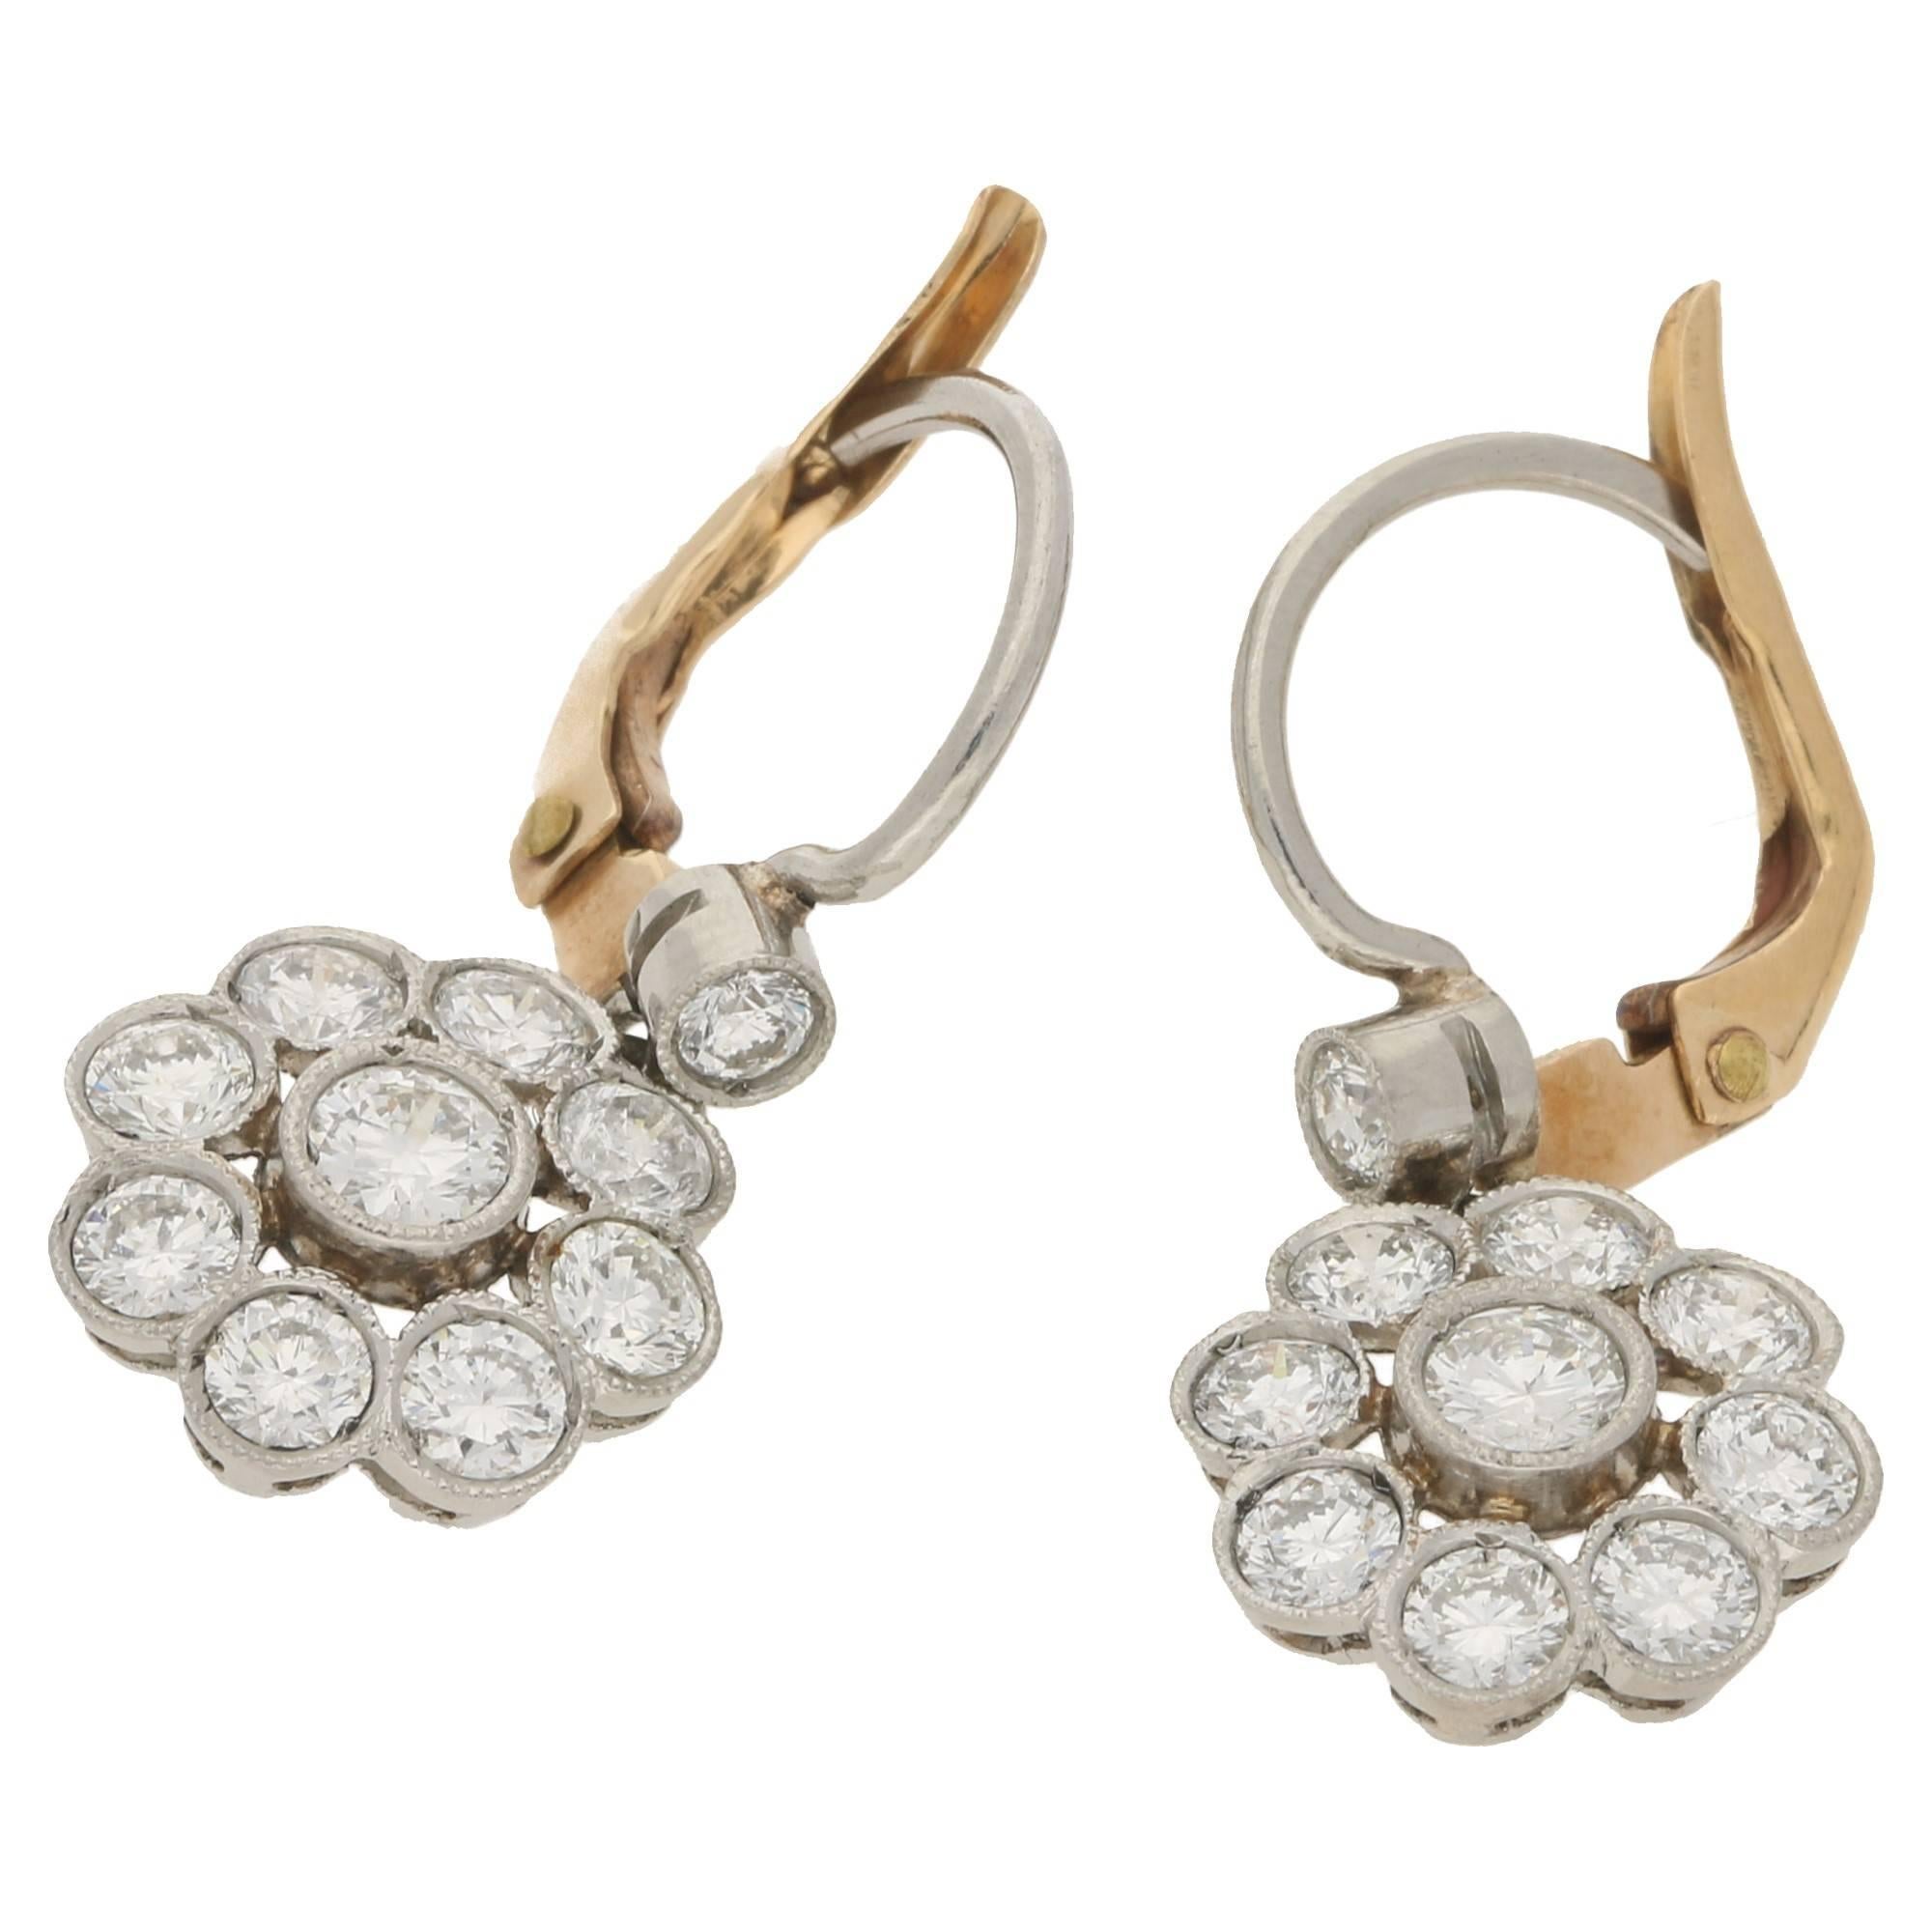 A gorgeous pair of diamond daisy cluster drop earrings. Each earring is formed of a collection of round brilliant cut diamonds forming a daisy motif with one set centrally with eight diamonds forming the outer detail. The diamonds are set in